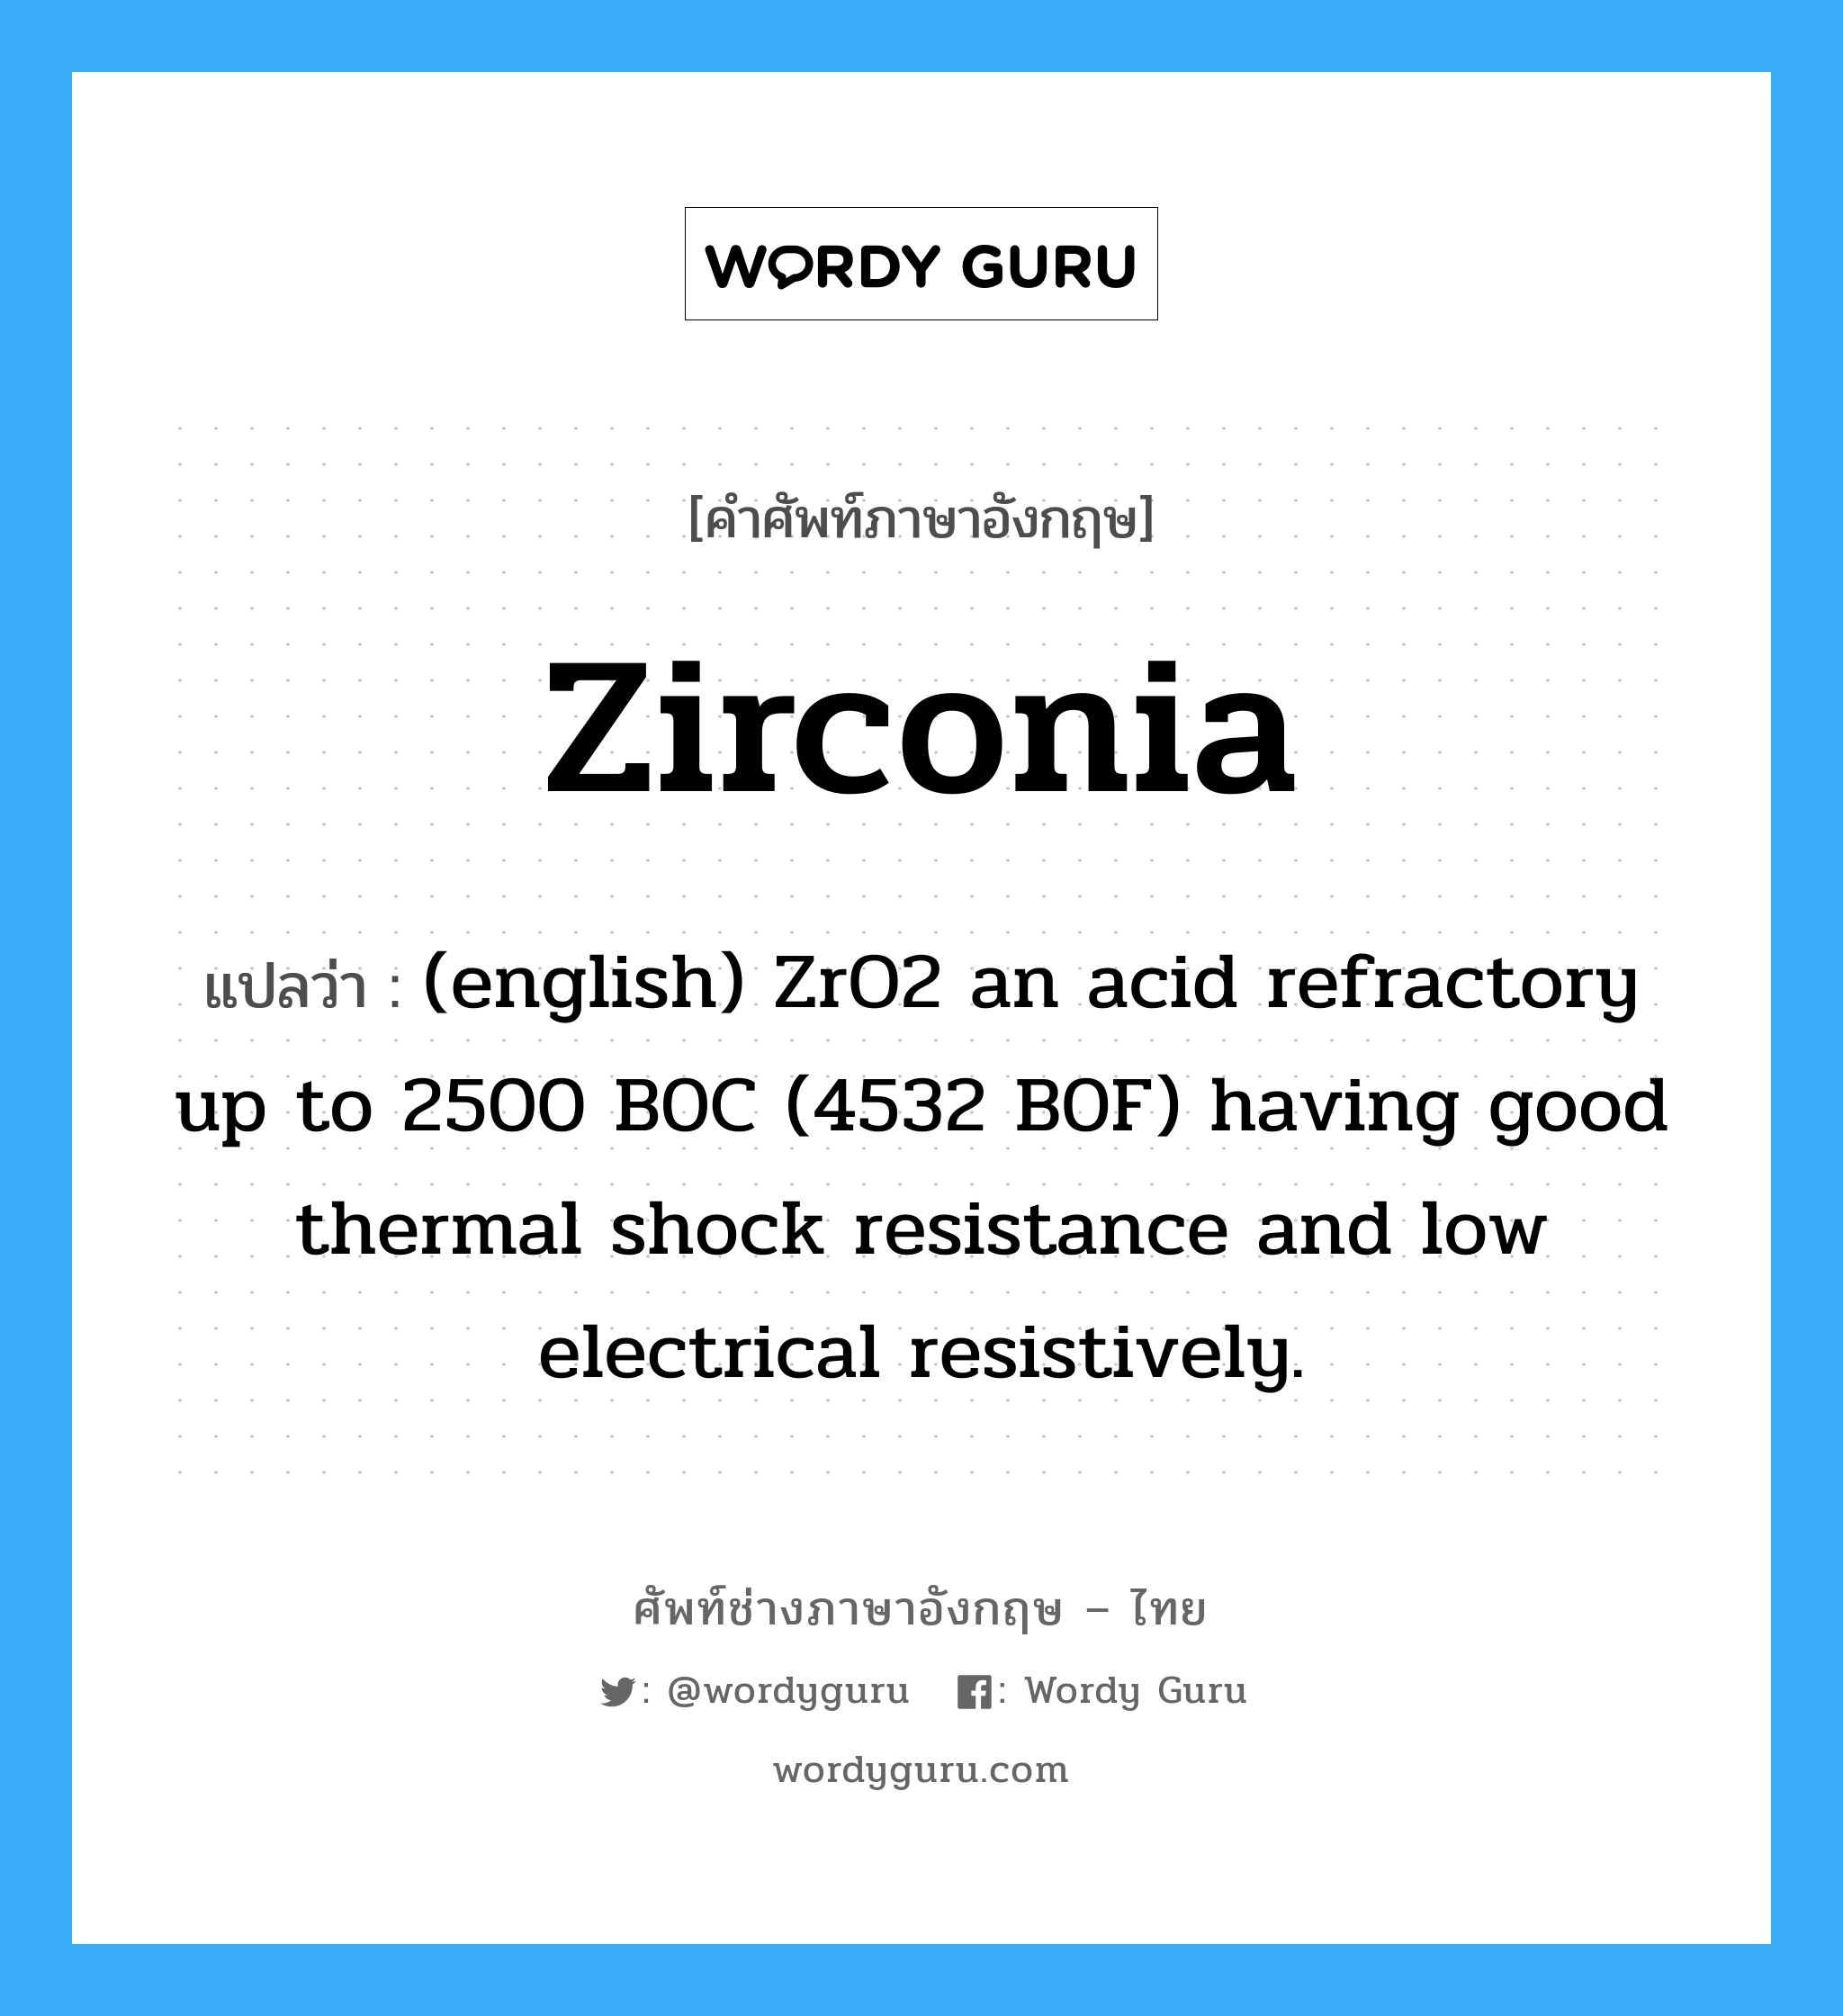 Zirconia แปลว่า?, คำศัพท์ช่างภาษาอังกฤษ - ไทย Zirconia คำศัพท์ภาษาอังกฤษ Zirconia แปลว่า (english) ZrO2 an acid refractory up to 2500 B0C (4532 B0F) having good thermal shock resistance and low electrical resistively.